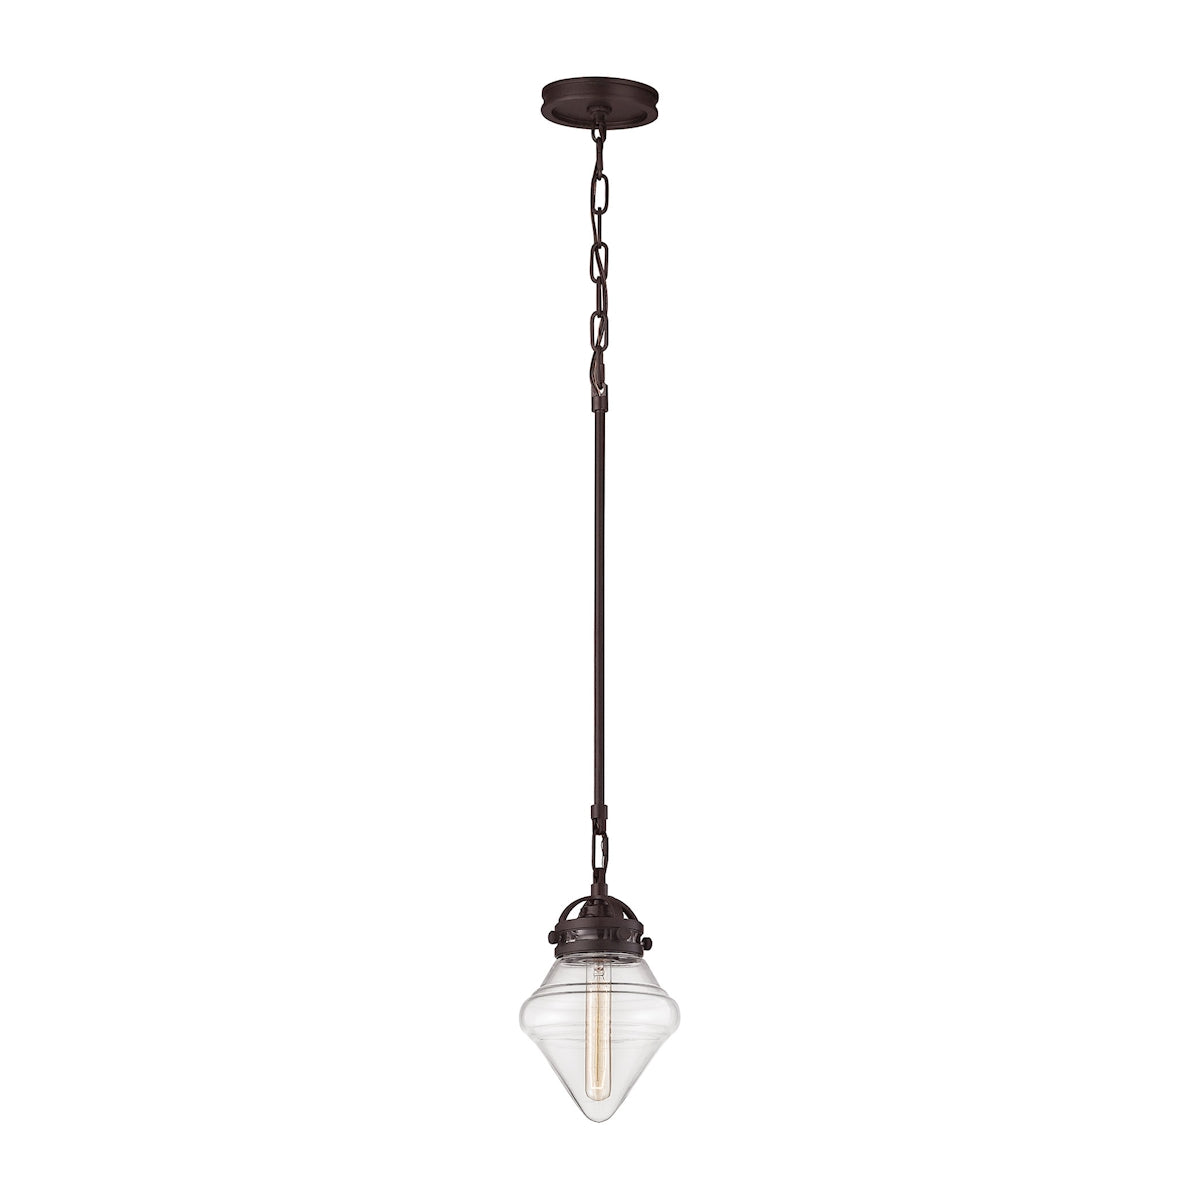 ELK Lighting 67125/1 Gramercy 1-Light Mini Pendant in Oil Rubbed Bronze with Clear Glass